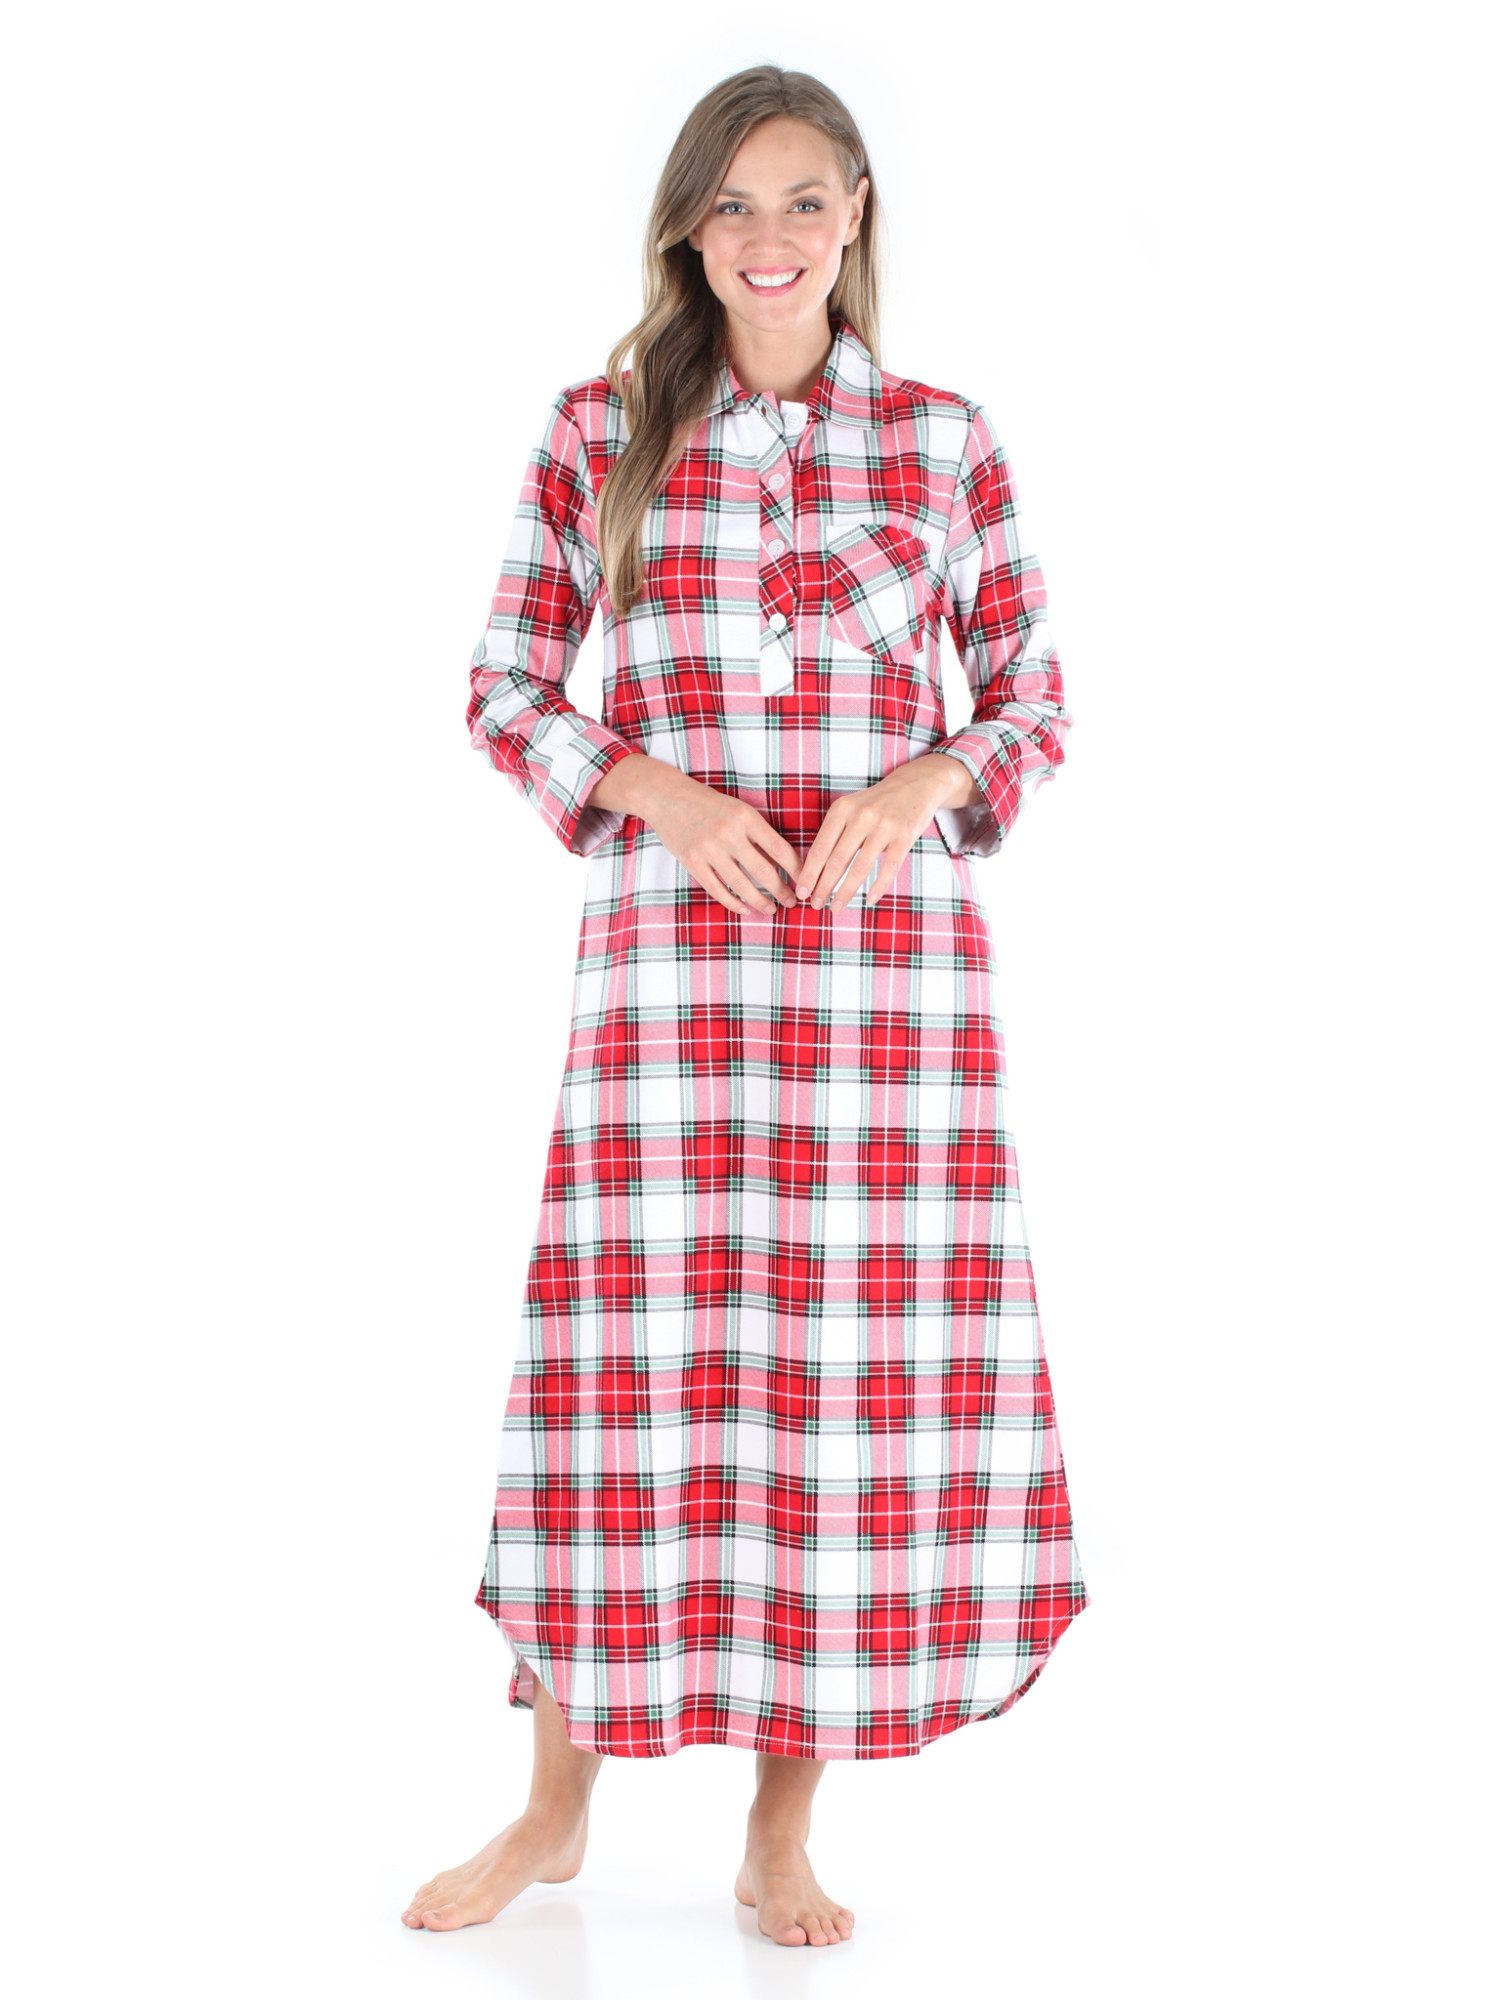 SleepytimePJs Matching Family Christmas Pajama Sets, Red & White Plaid Flannel - image 2 of 6